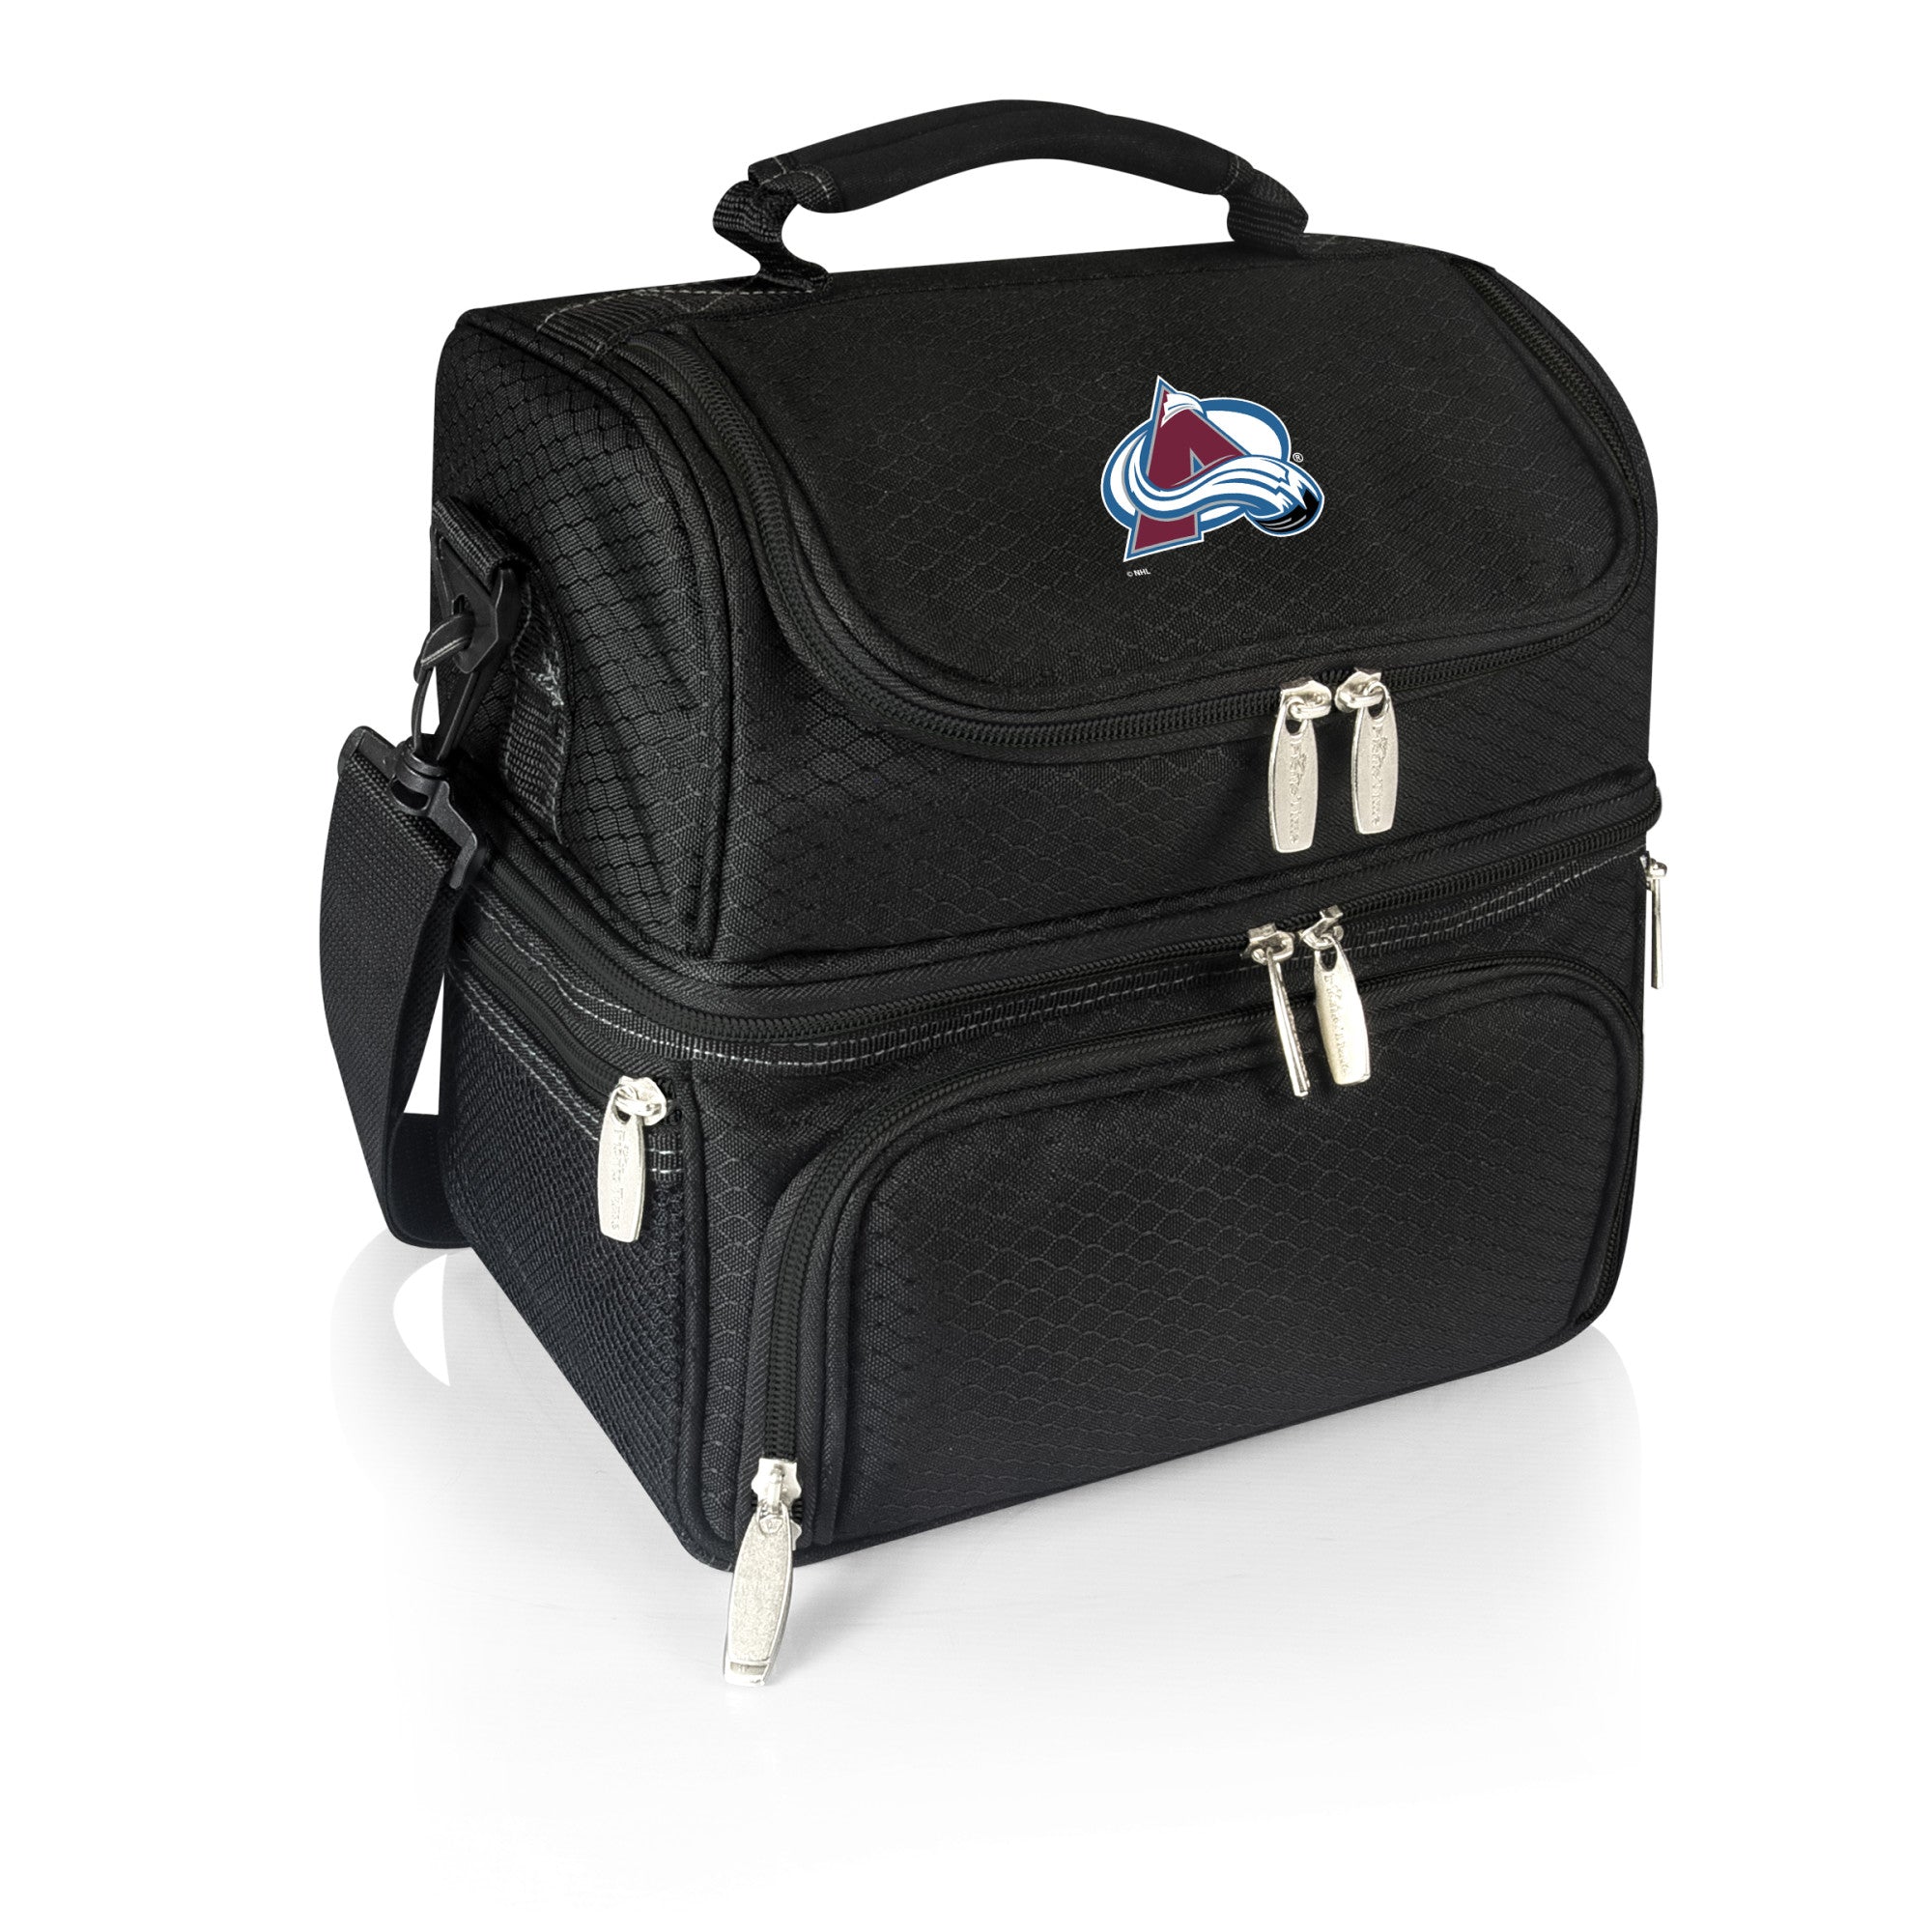 Colorado Avalanche - Pranzo Lunch Bag Cooler with Utensils